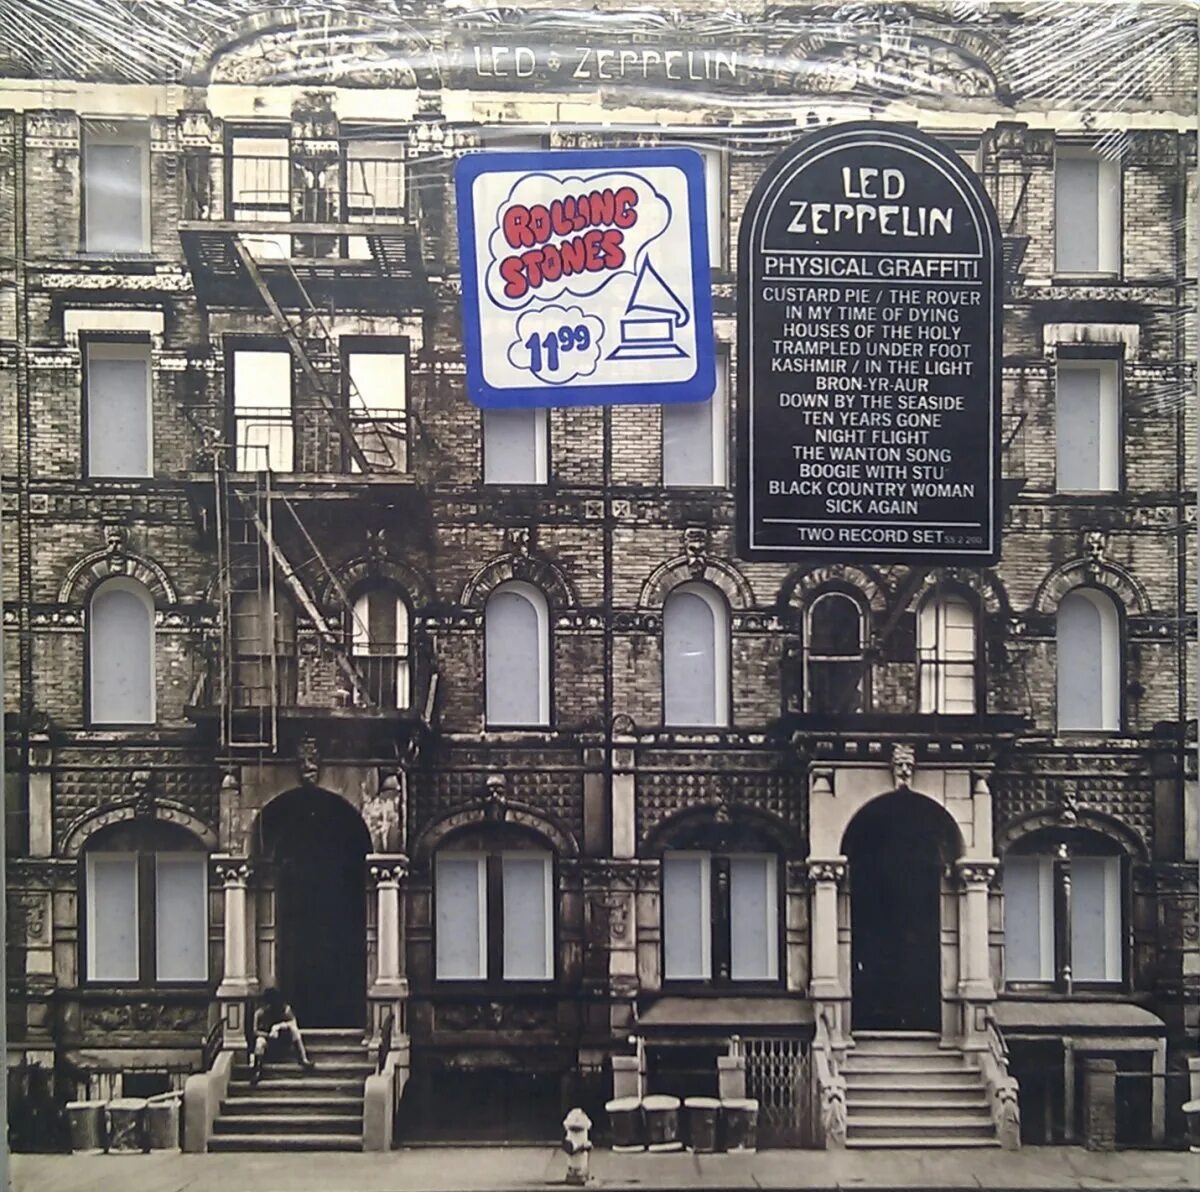 Led zeppelin physical. Лед Зеппелин physical Graffiti. Led Zeppelin physical Graffiti обложка альбома. Led Zeppelin. Physical Graffiti 2 LP. Led Zeppelin physical Graffiti 1975 обложка.